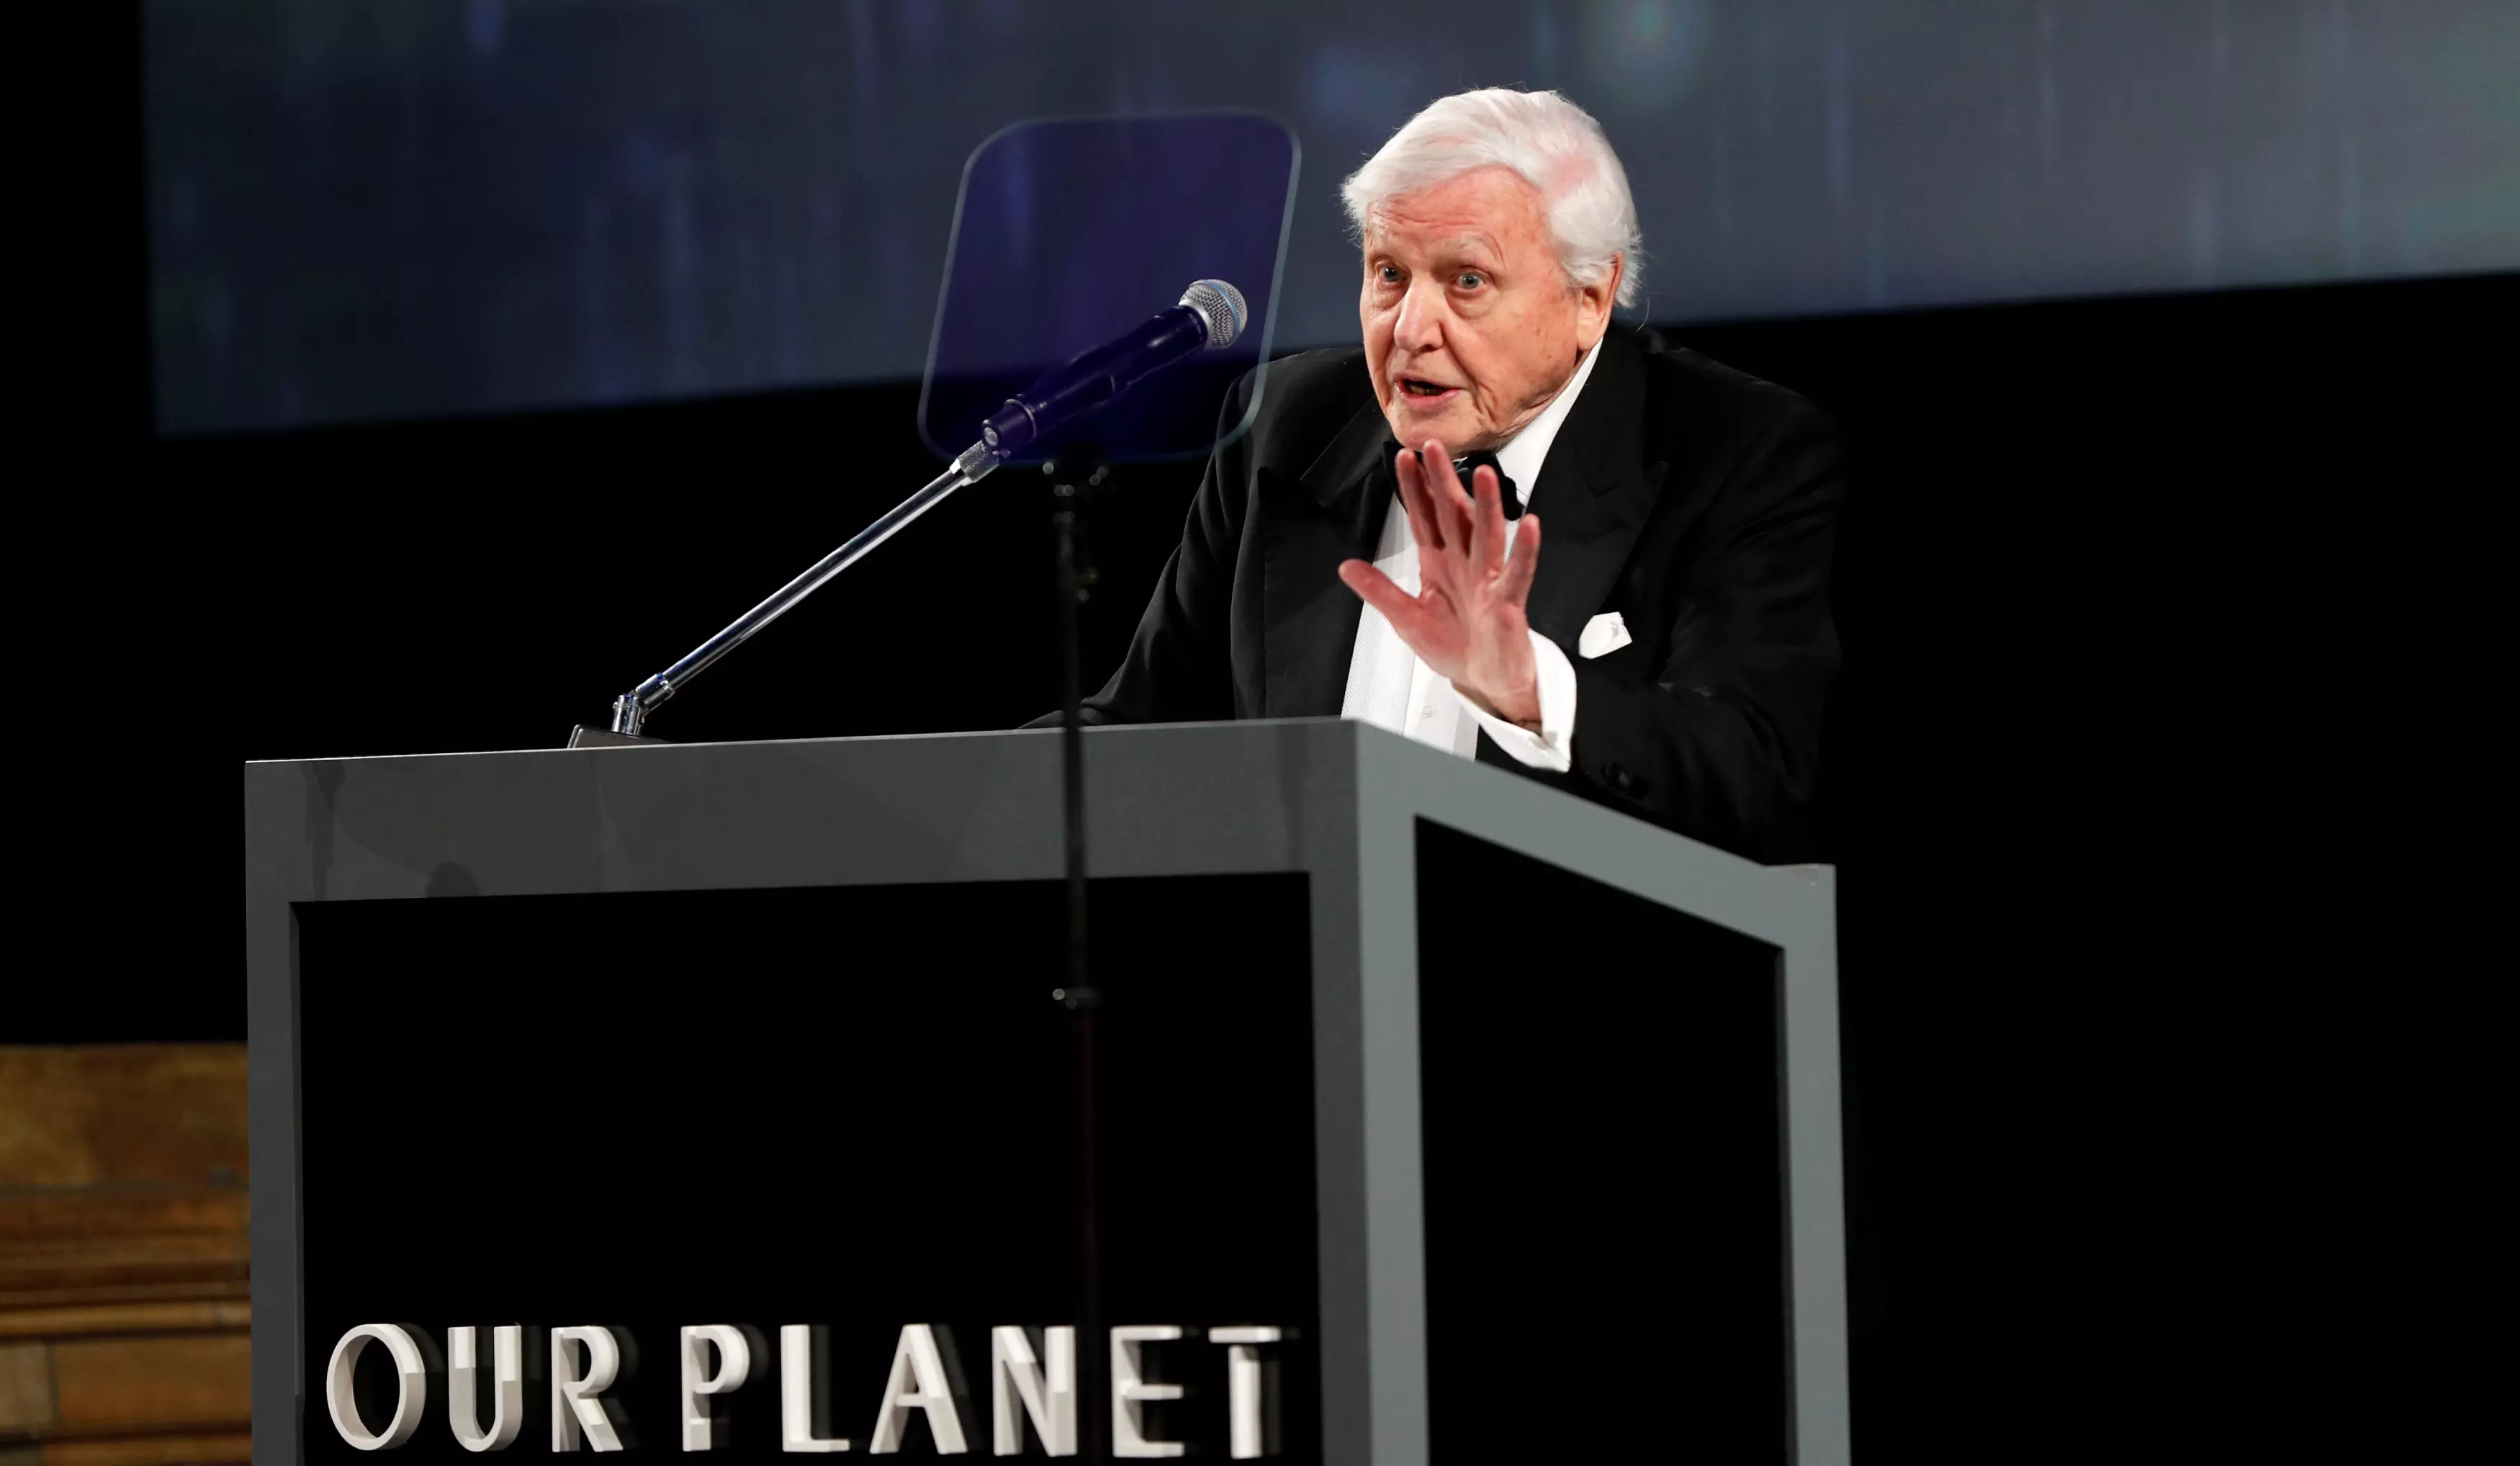 David Attenborough passionately campaigns about the state of the planet